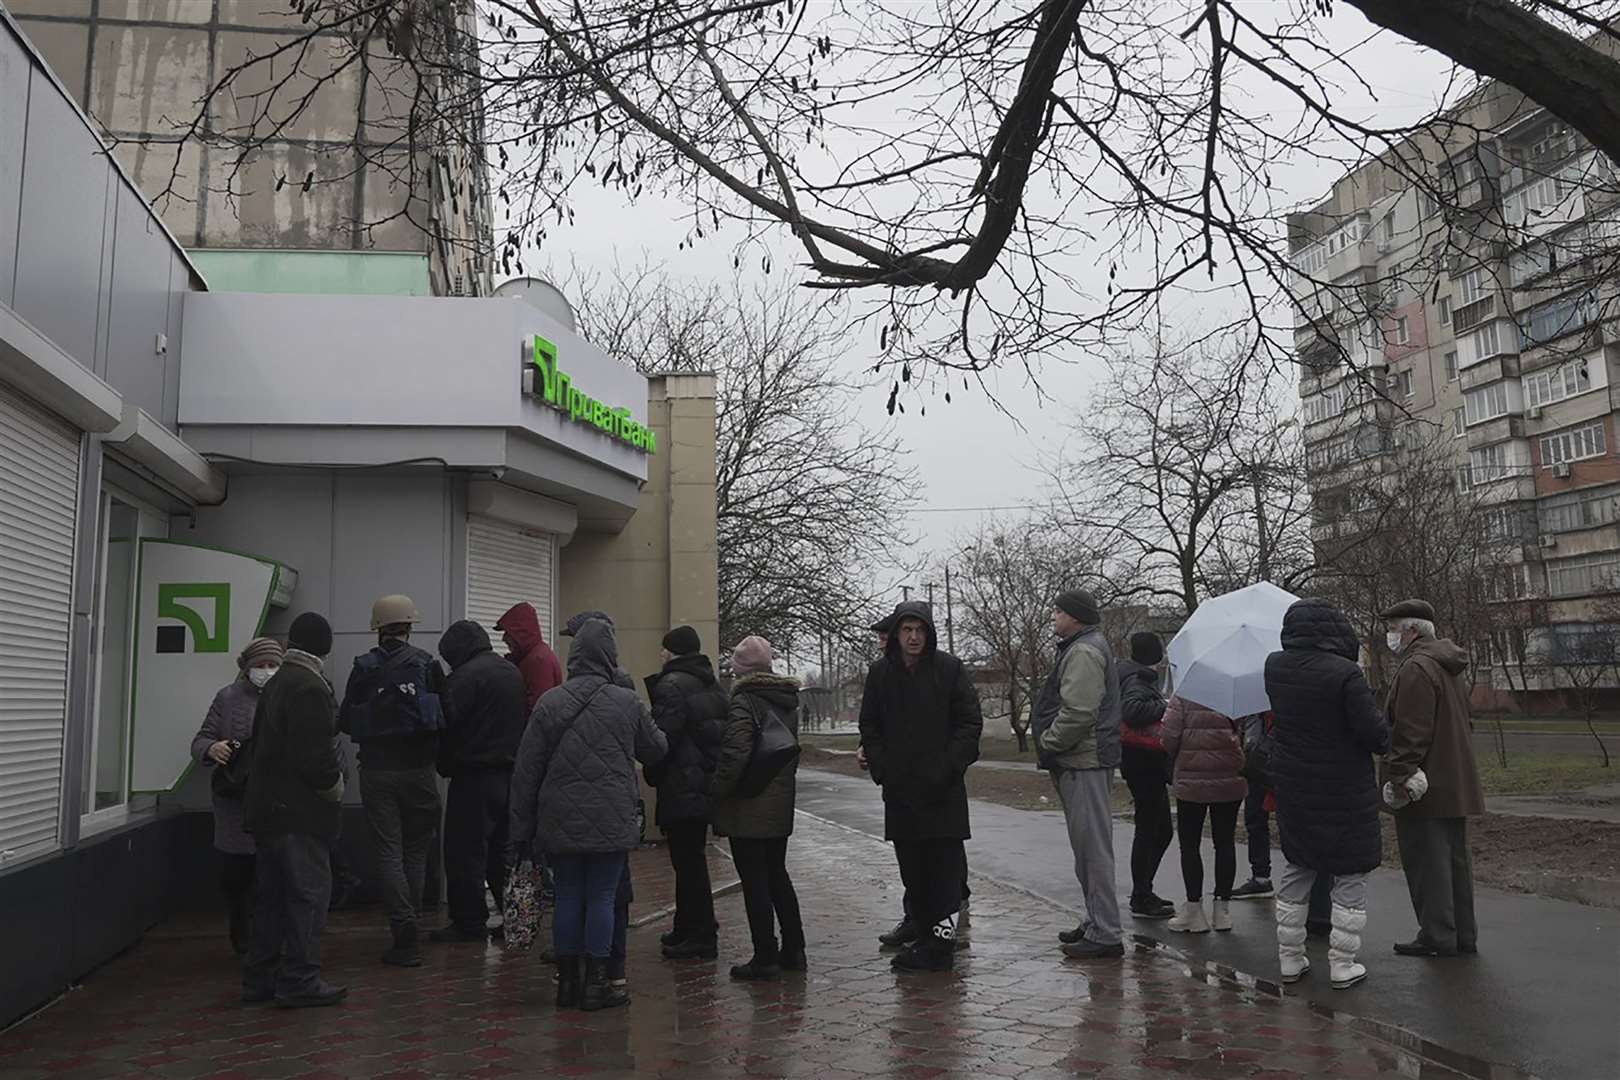 People queued in the streets of Ukraine to get their money from ATMs earlier today. Photo: AP/Evgeniy Maloletka